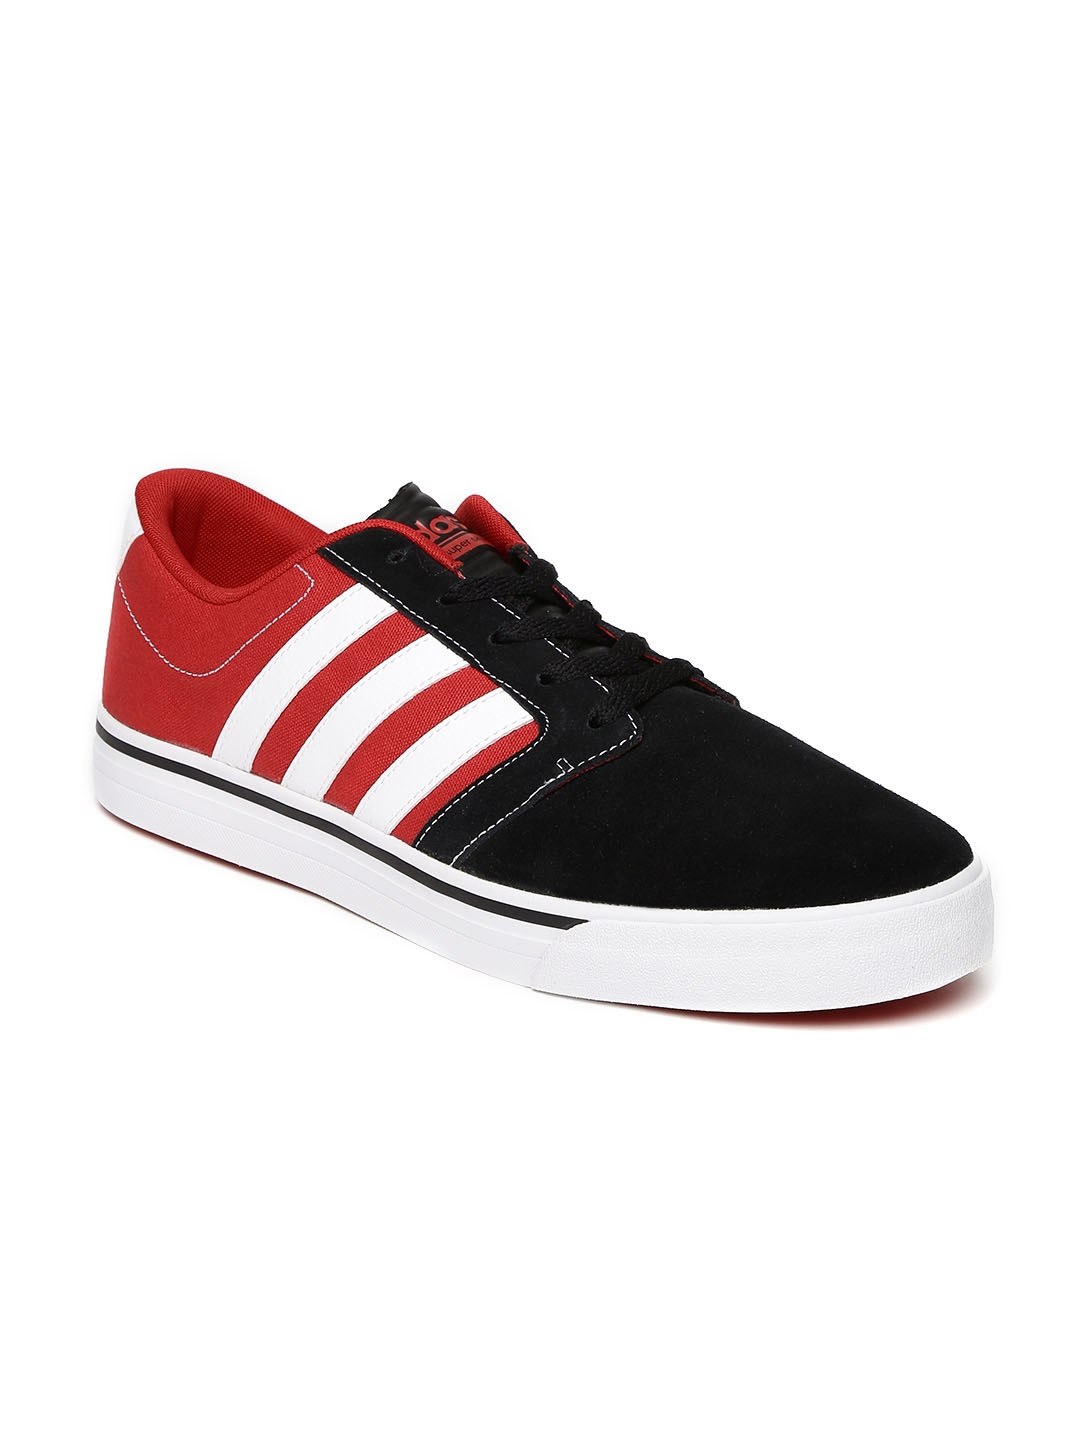 Buy ADIDAS NEO Men Black & Red Colourblocked Suede Leather Cloudfoam ...